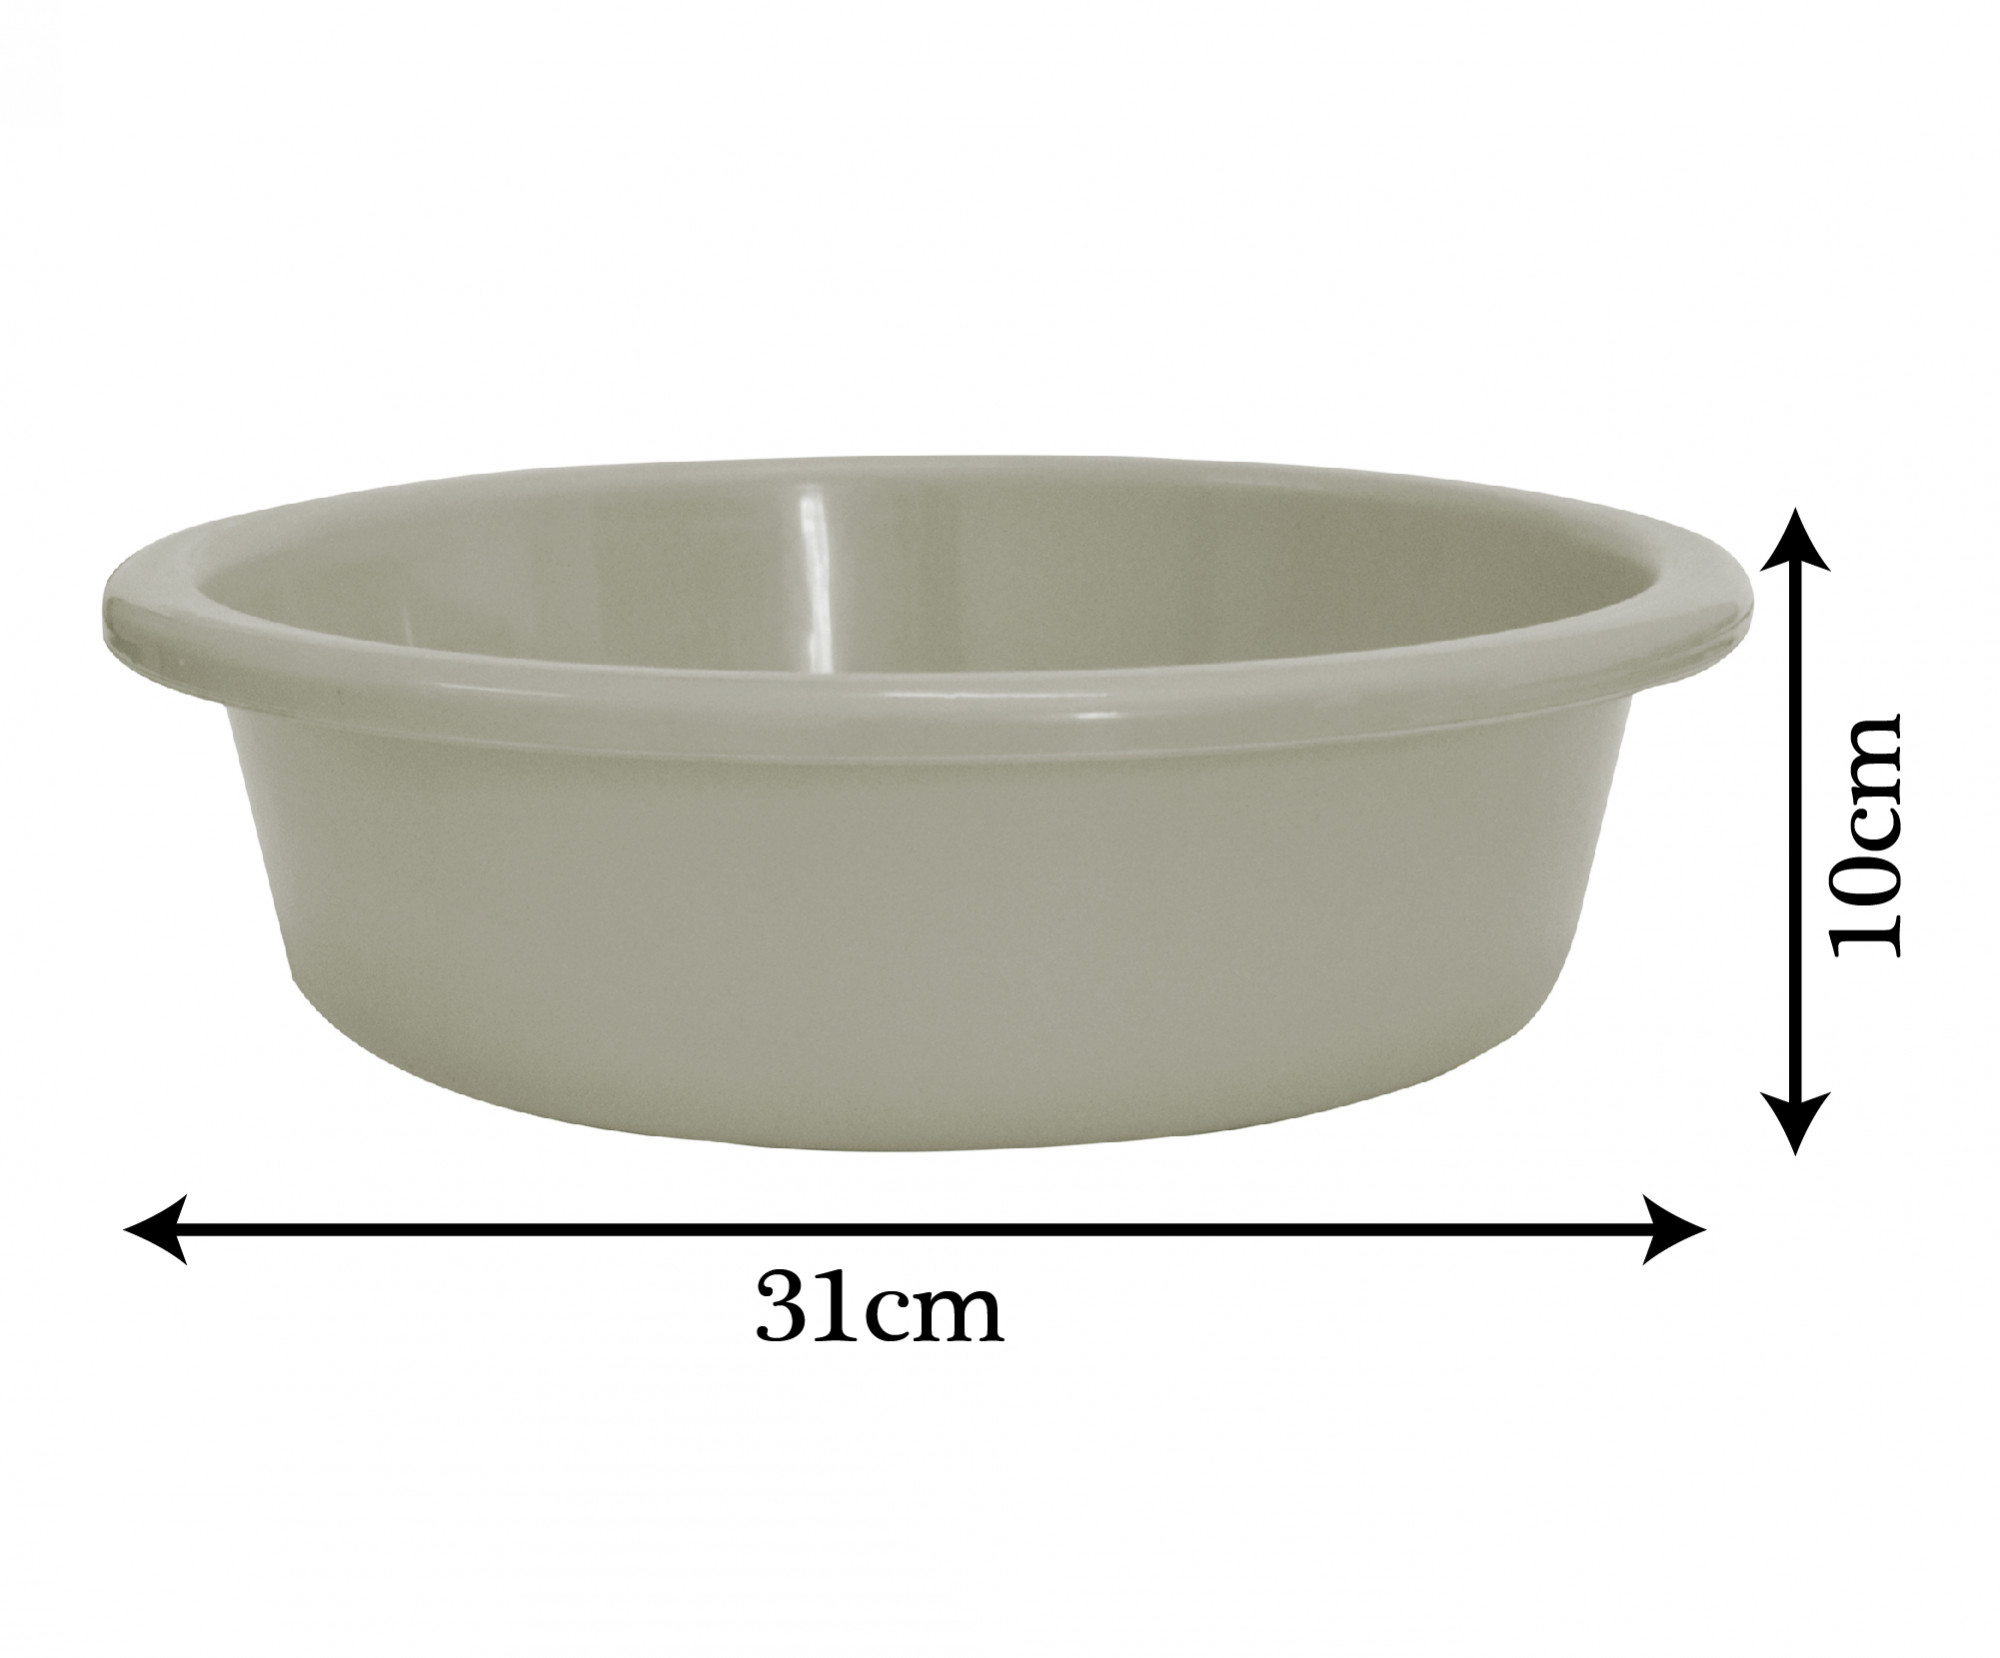 Kuber Industries Multiuses Unbreakable Plastic Knead Dough Basket/Basin Bowl For Home & Kitchen 6 Ltr- Pack of 2 (Sky Blue & Grey)